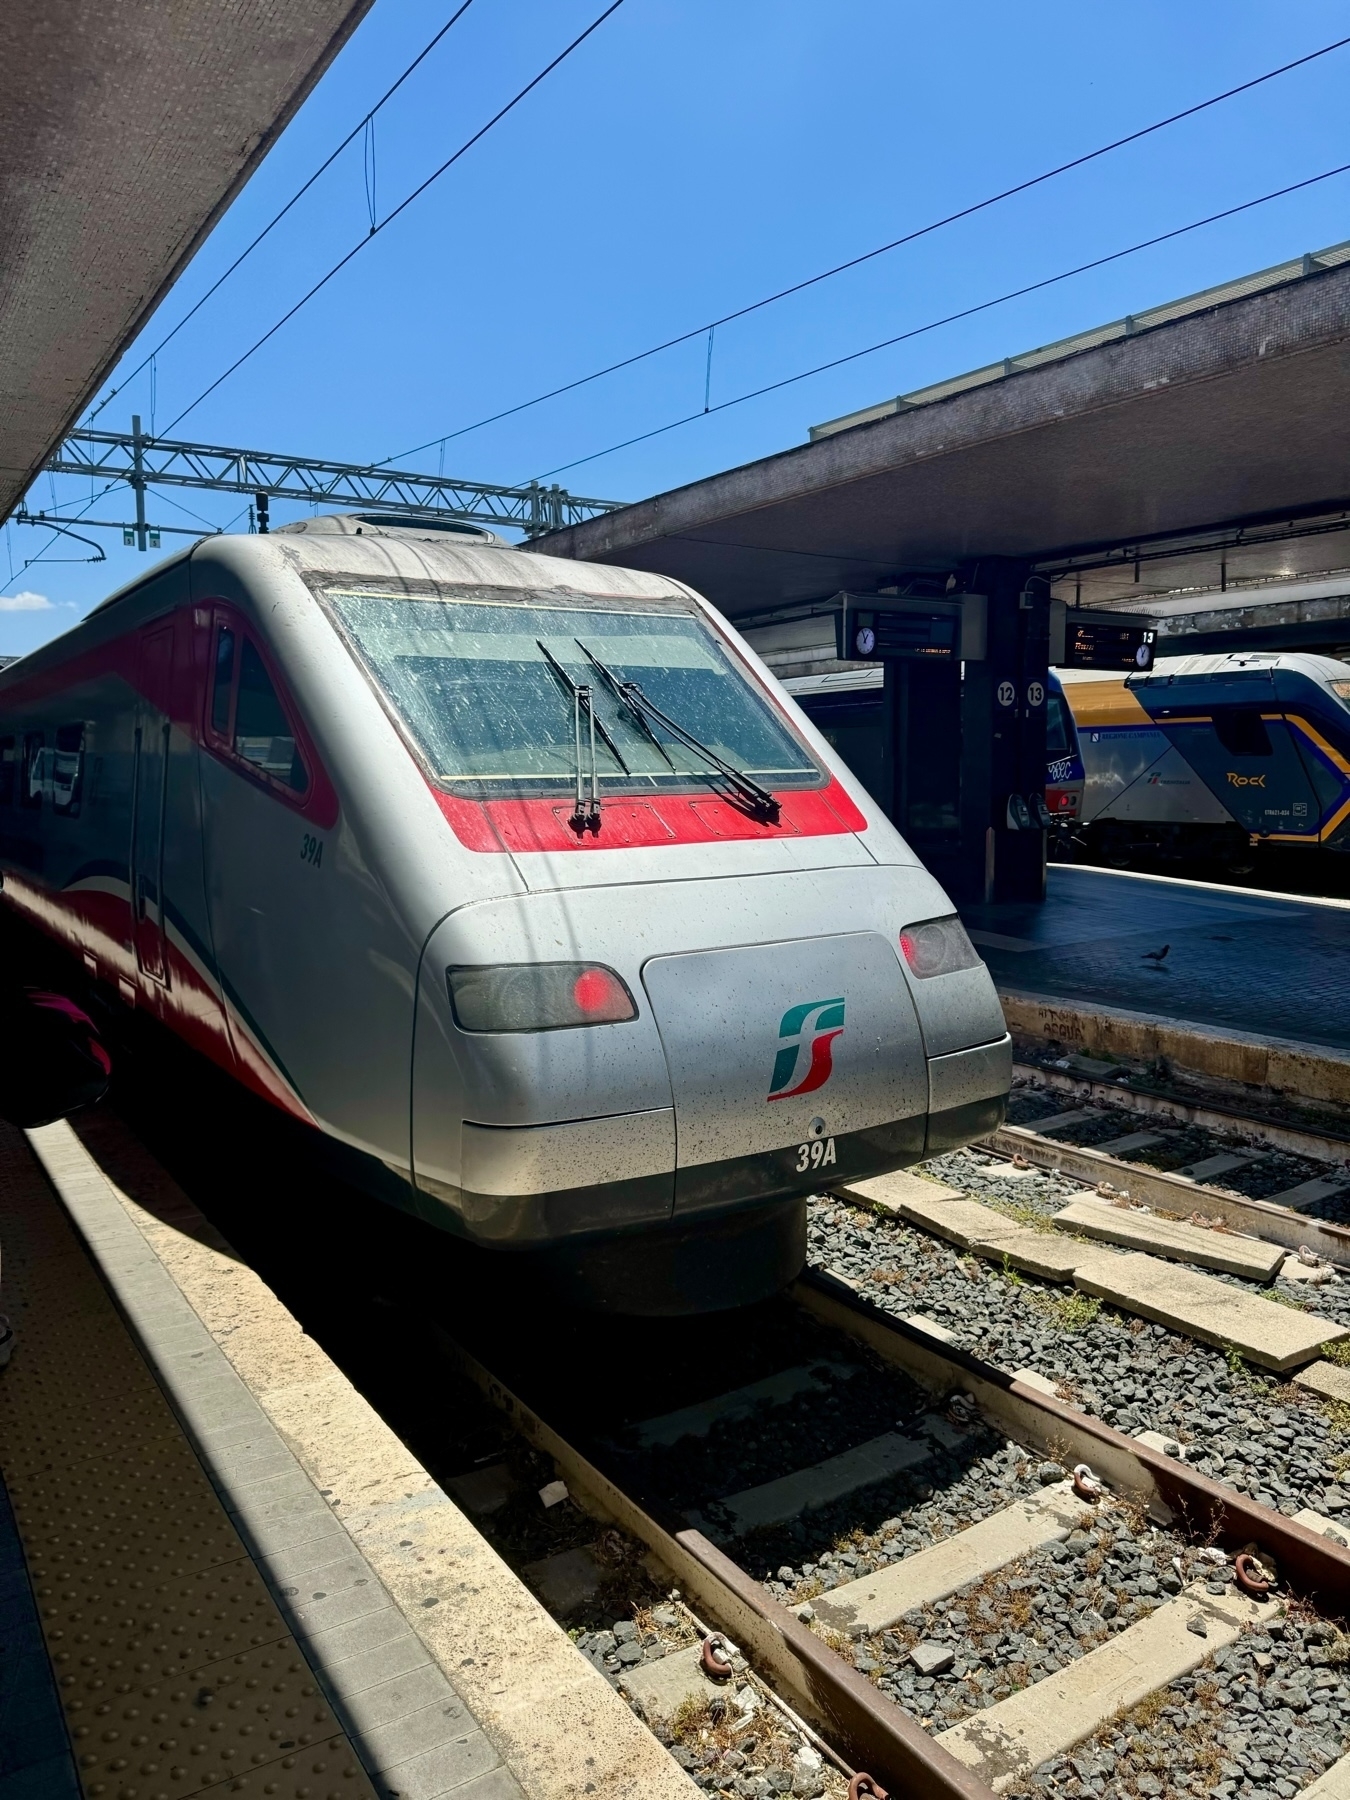 A modern high-speed train on a railway track at a train station, with another train visible in the background. It is a sunny day with clear blue skies, and the station platform is partially shaded. 